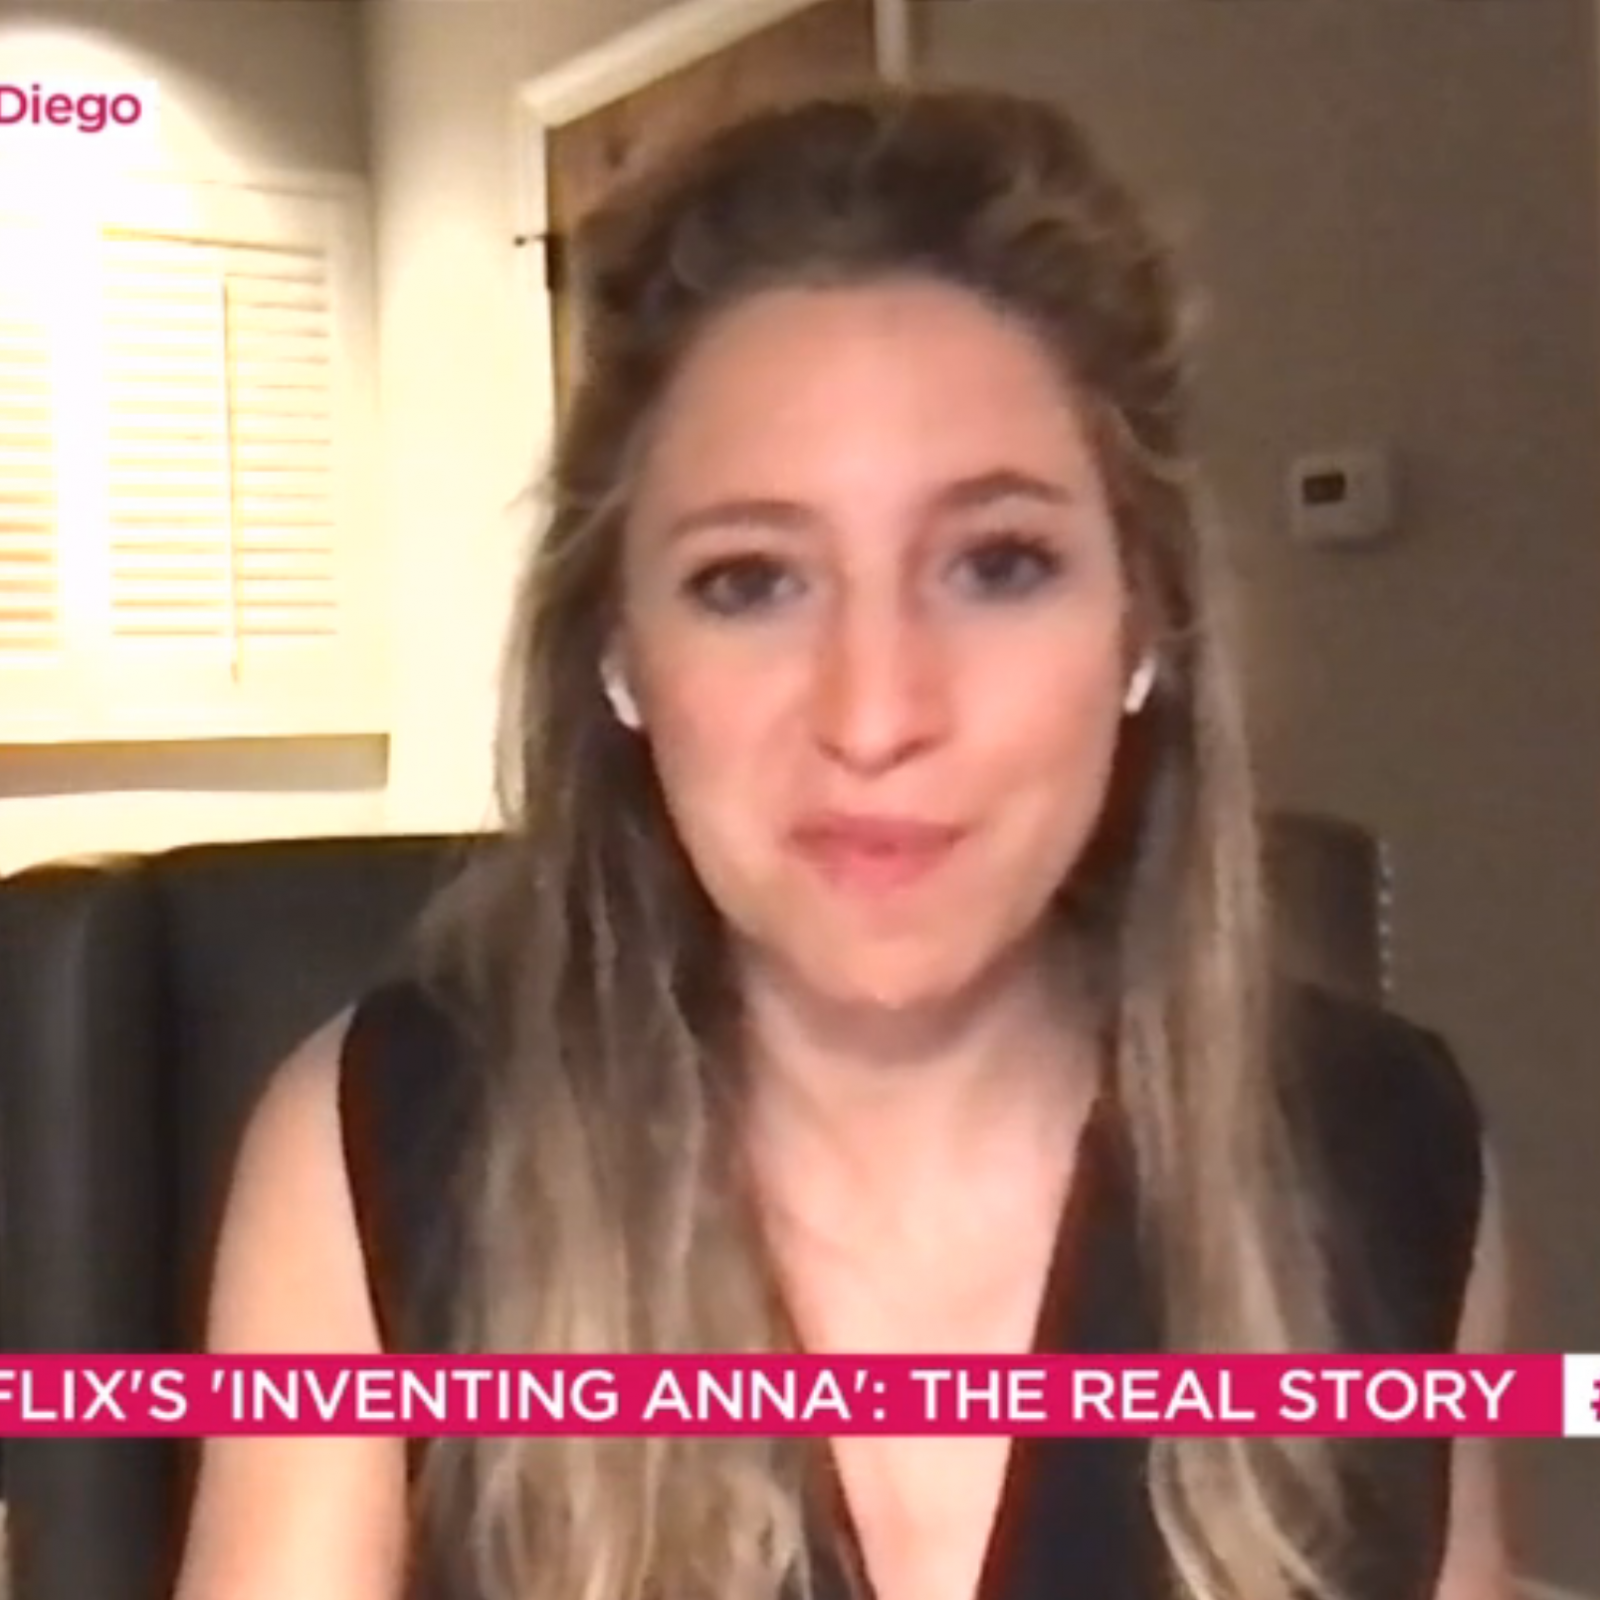 Is inventing anna a true story